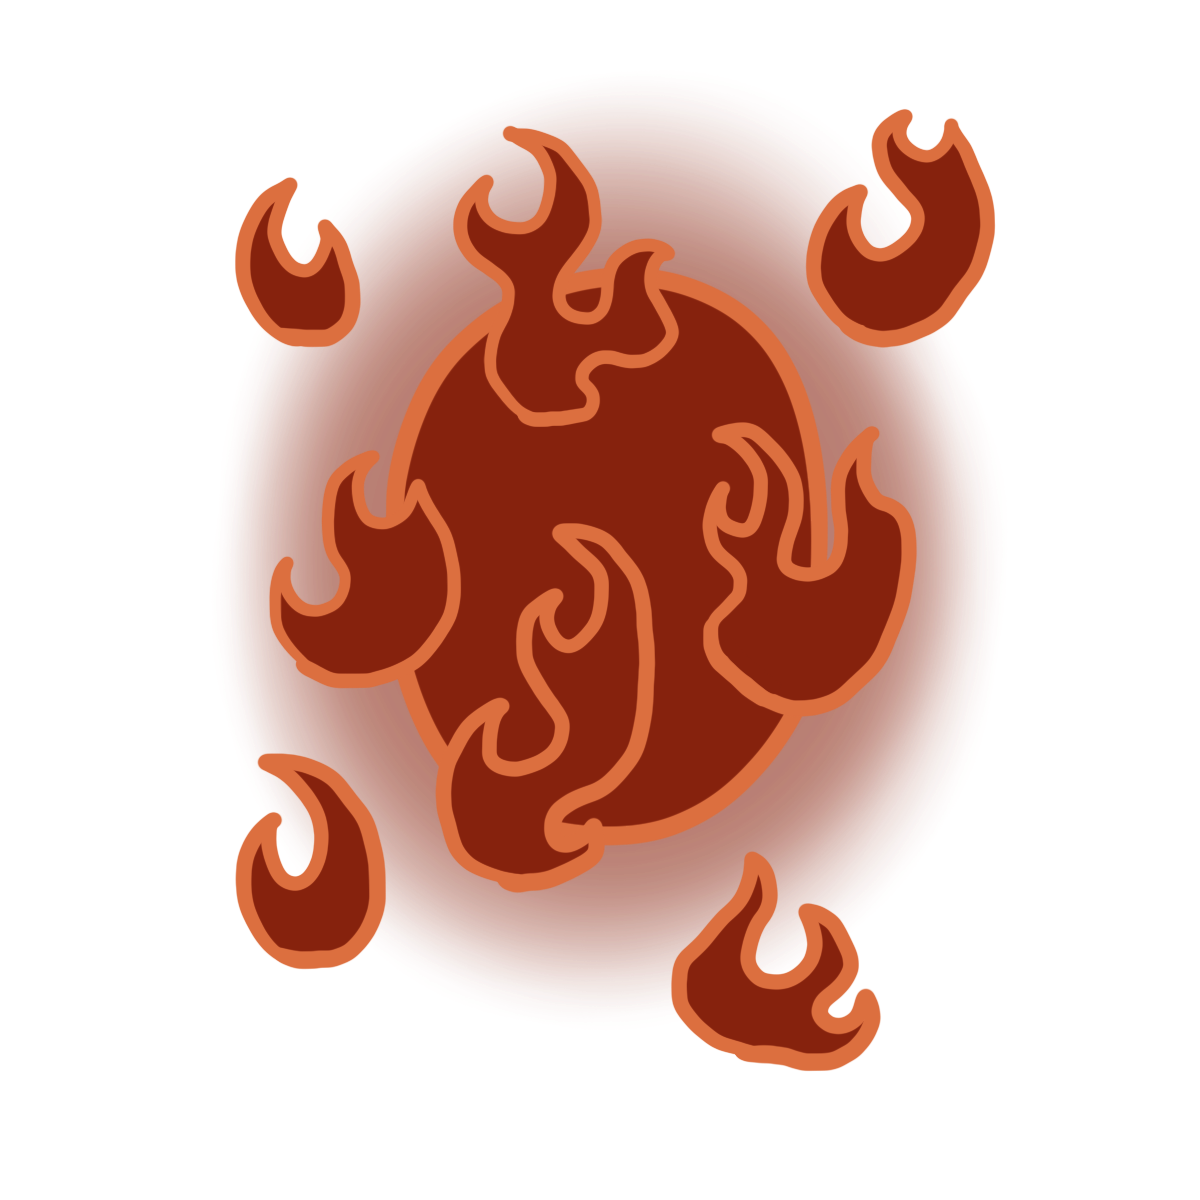 Orange-red oval with flames around it.